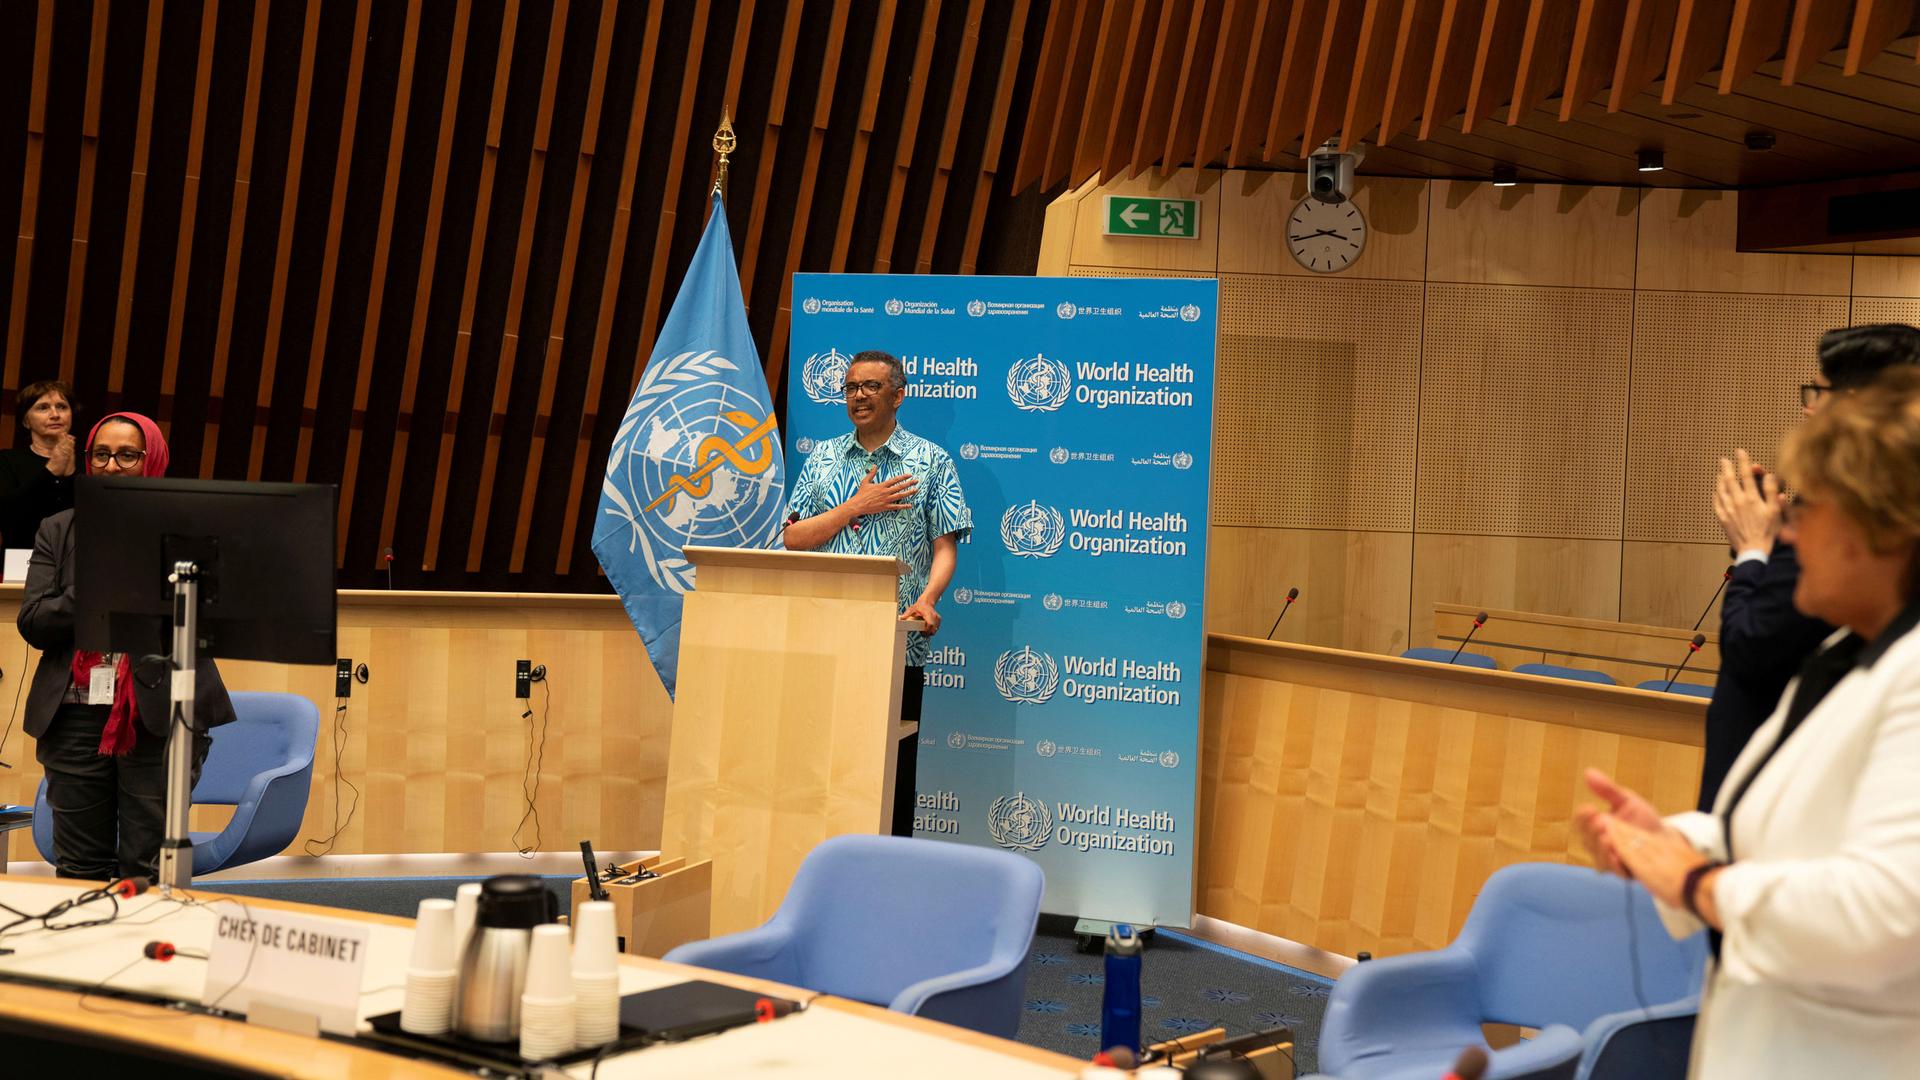 Tedros Adhanom Ghebreyesus is shown standing at a wooden podium with the blue WHO flag next to him and wearing a blue-print button down short-sleeved shirt.